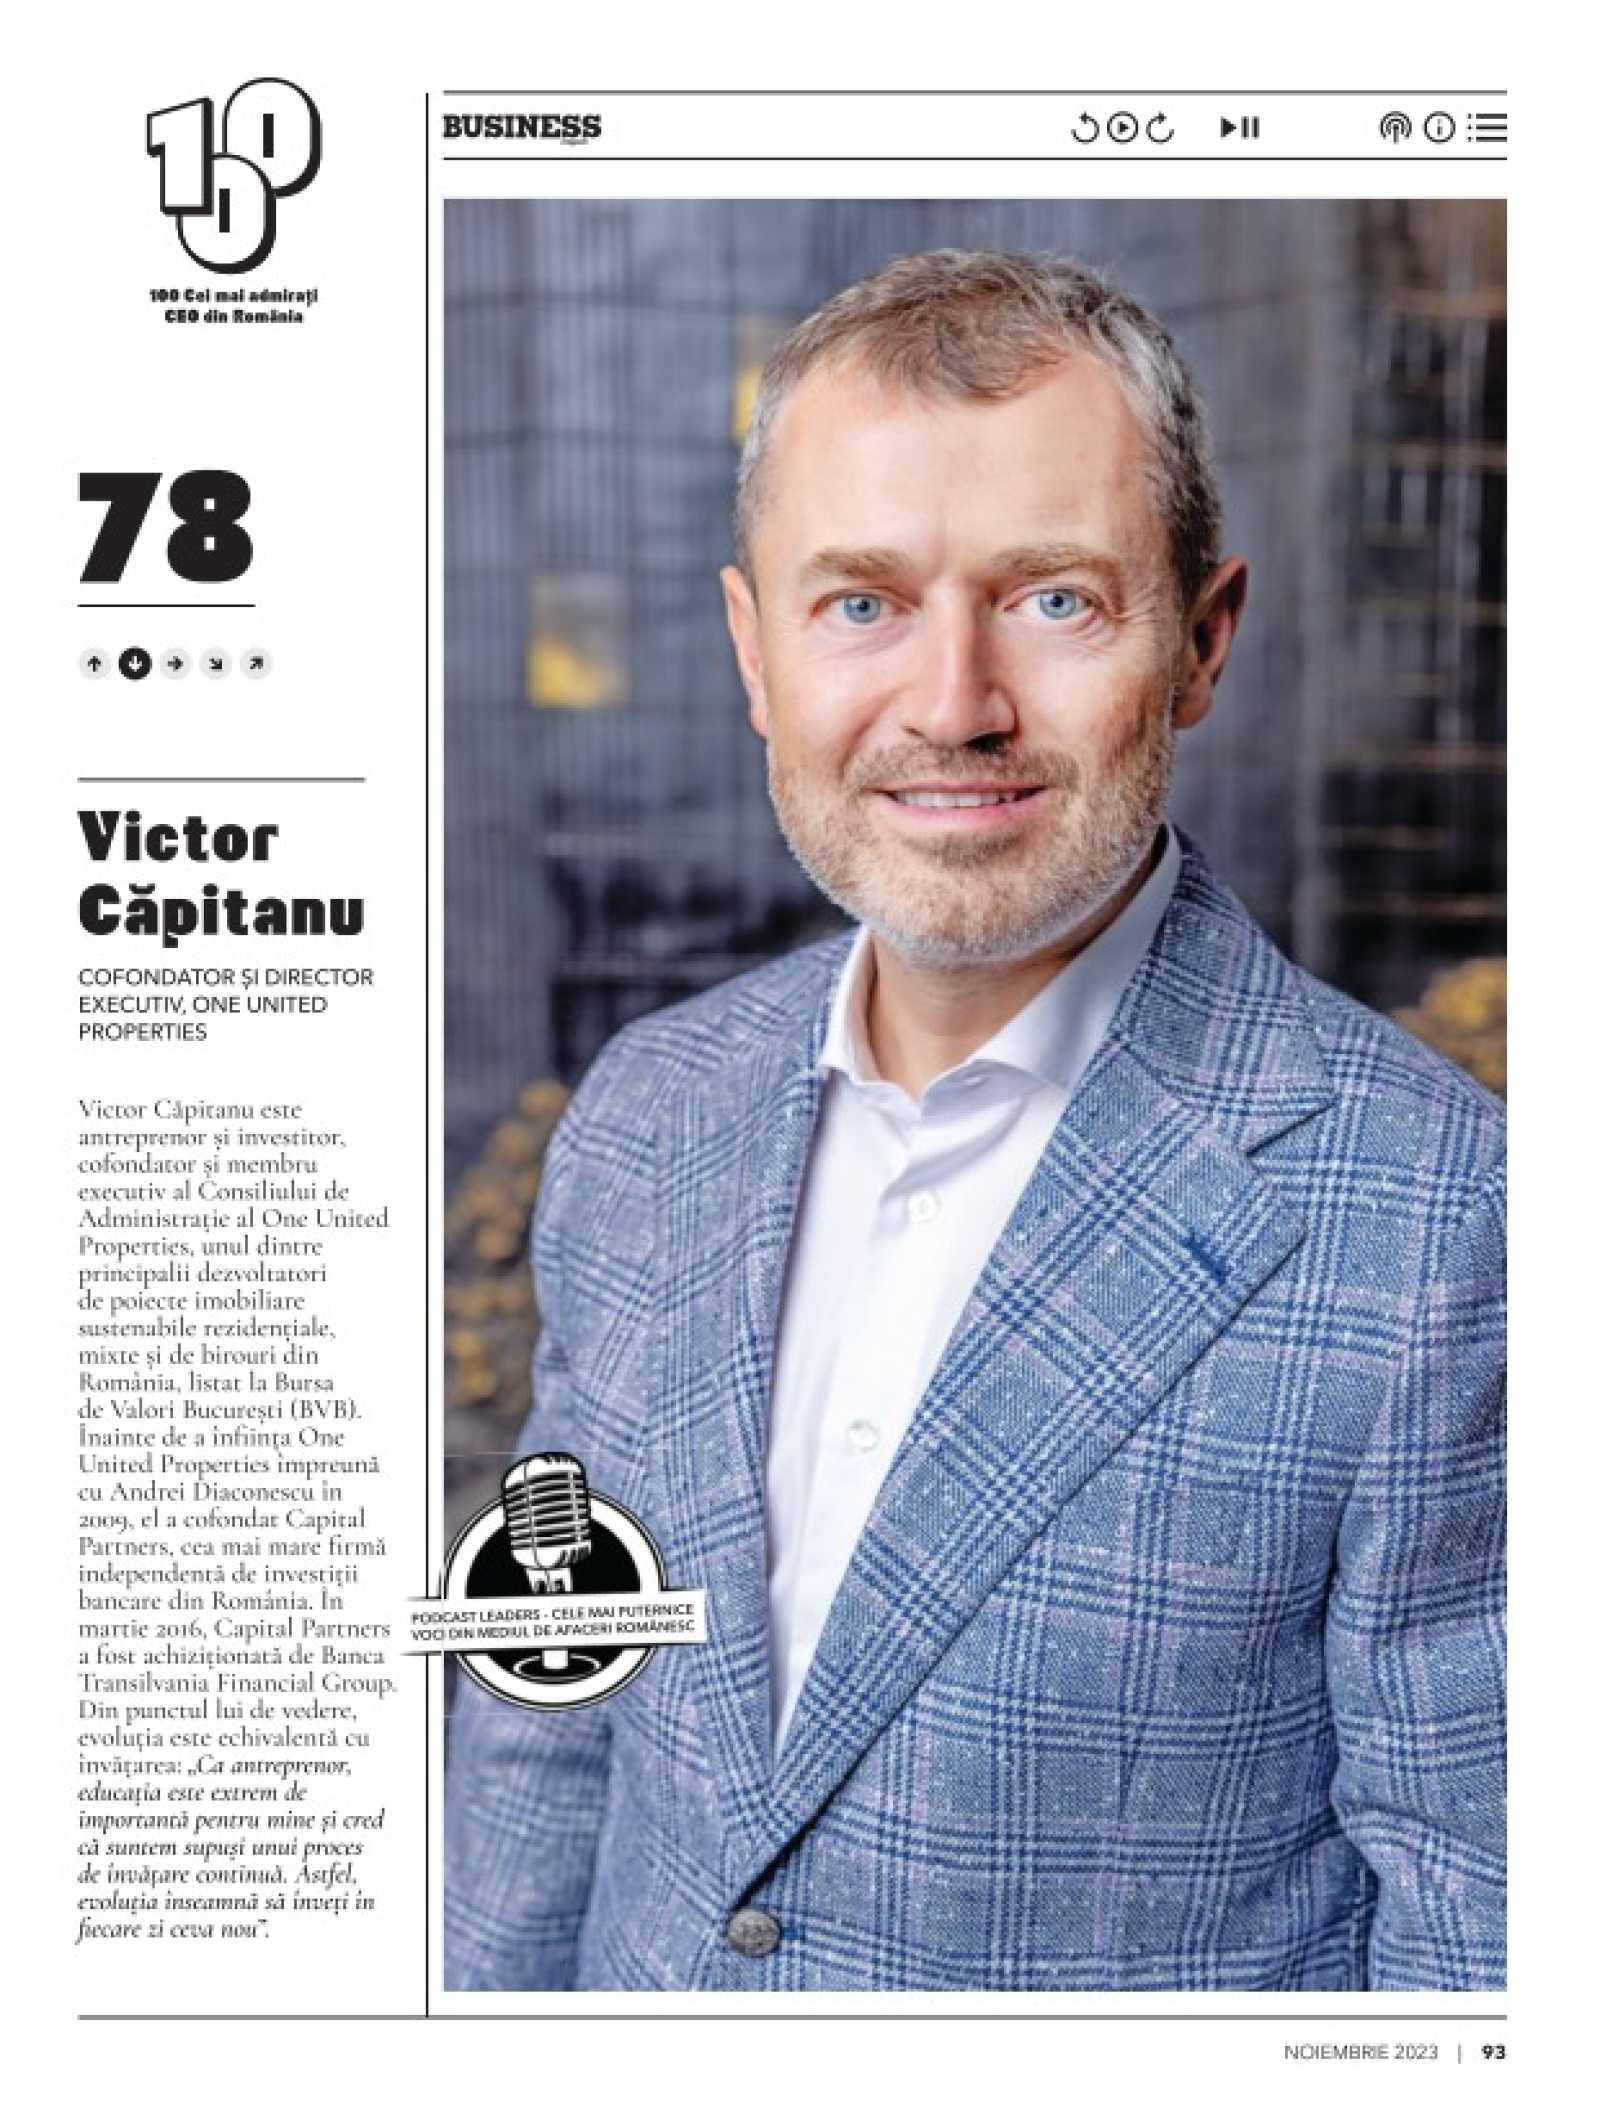 20231207 - Victor Căpitanu on Business Magazin 100 most admired CEOs list